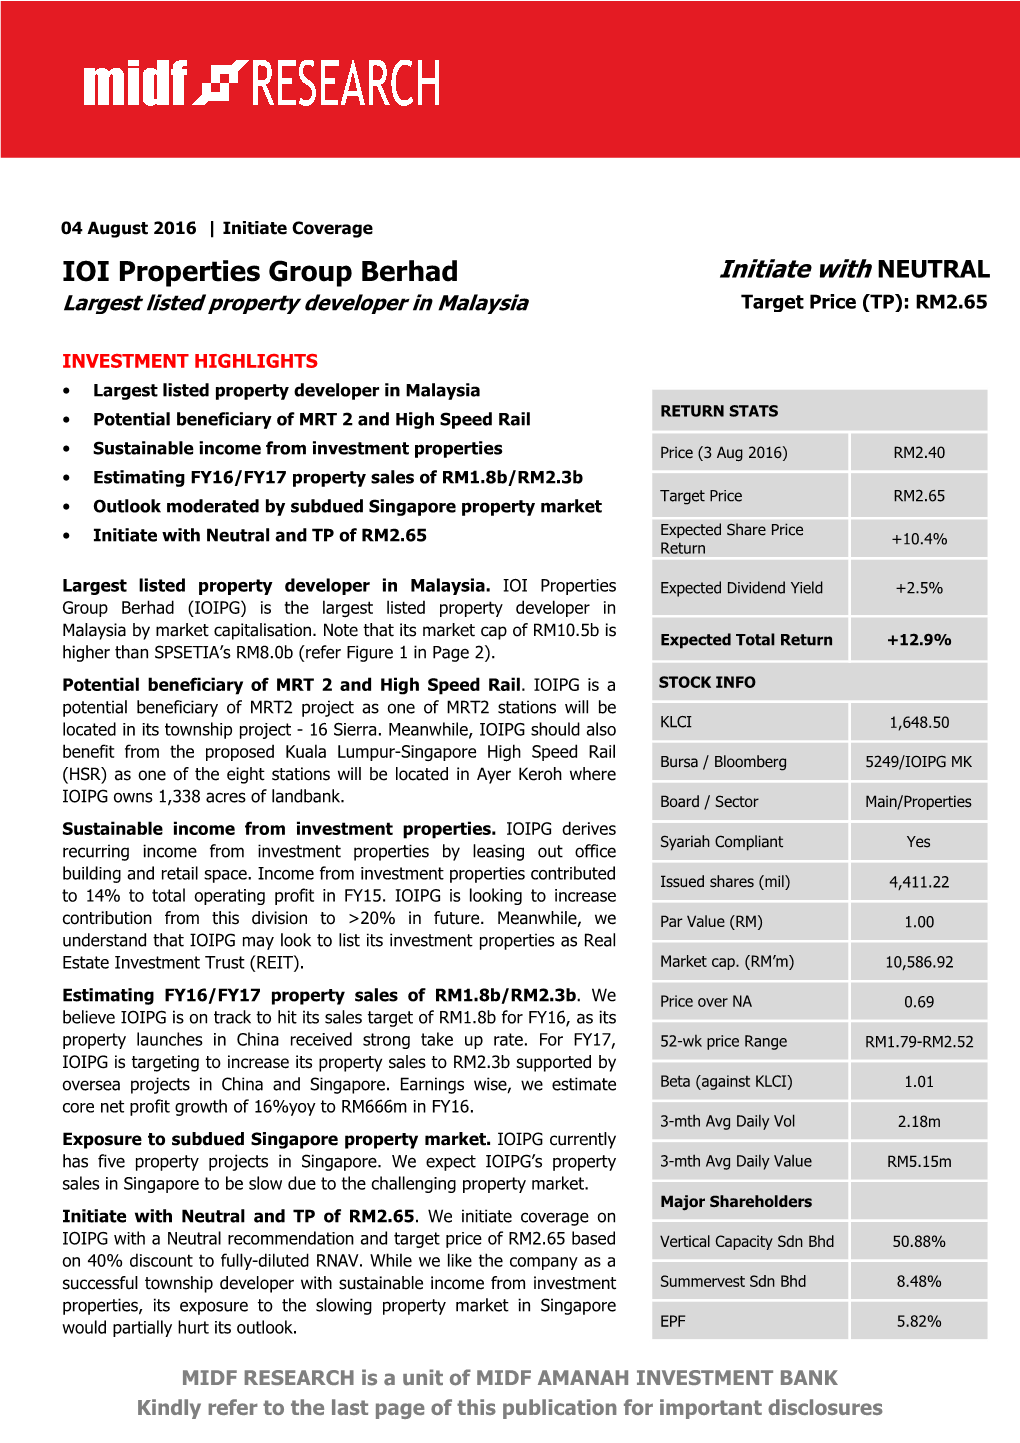 IOI Properties Group Berhad Initiate with NEUTRAL Largest Listed Property Developer in Malaysia Target Price (TP): RM2.65